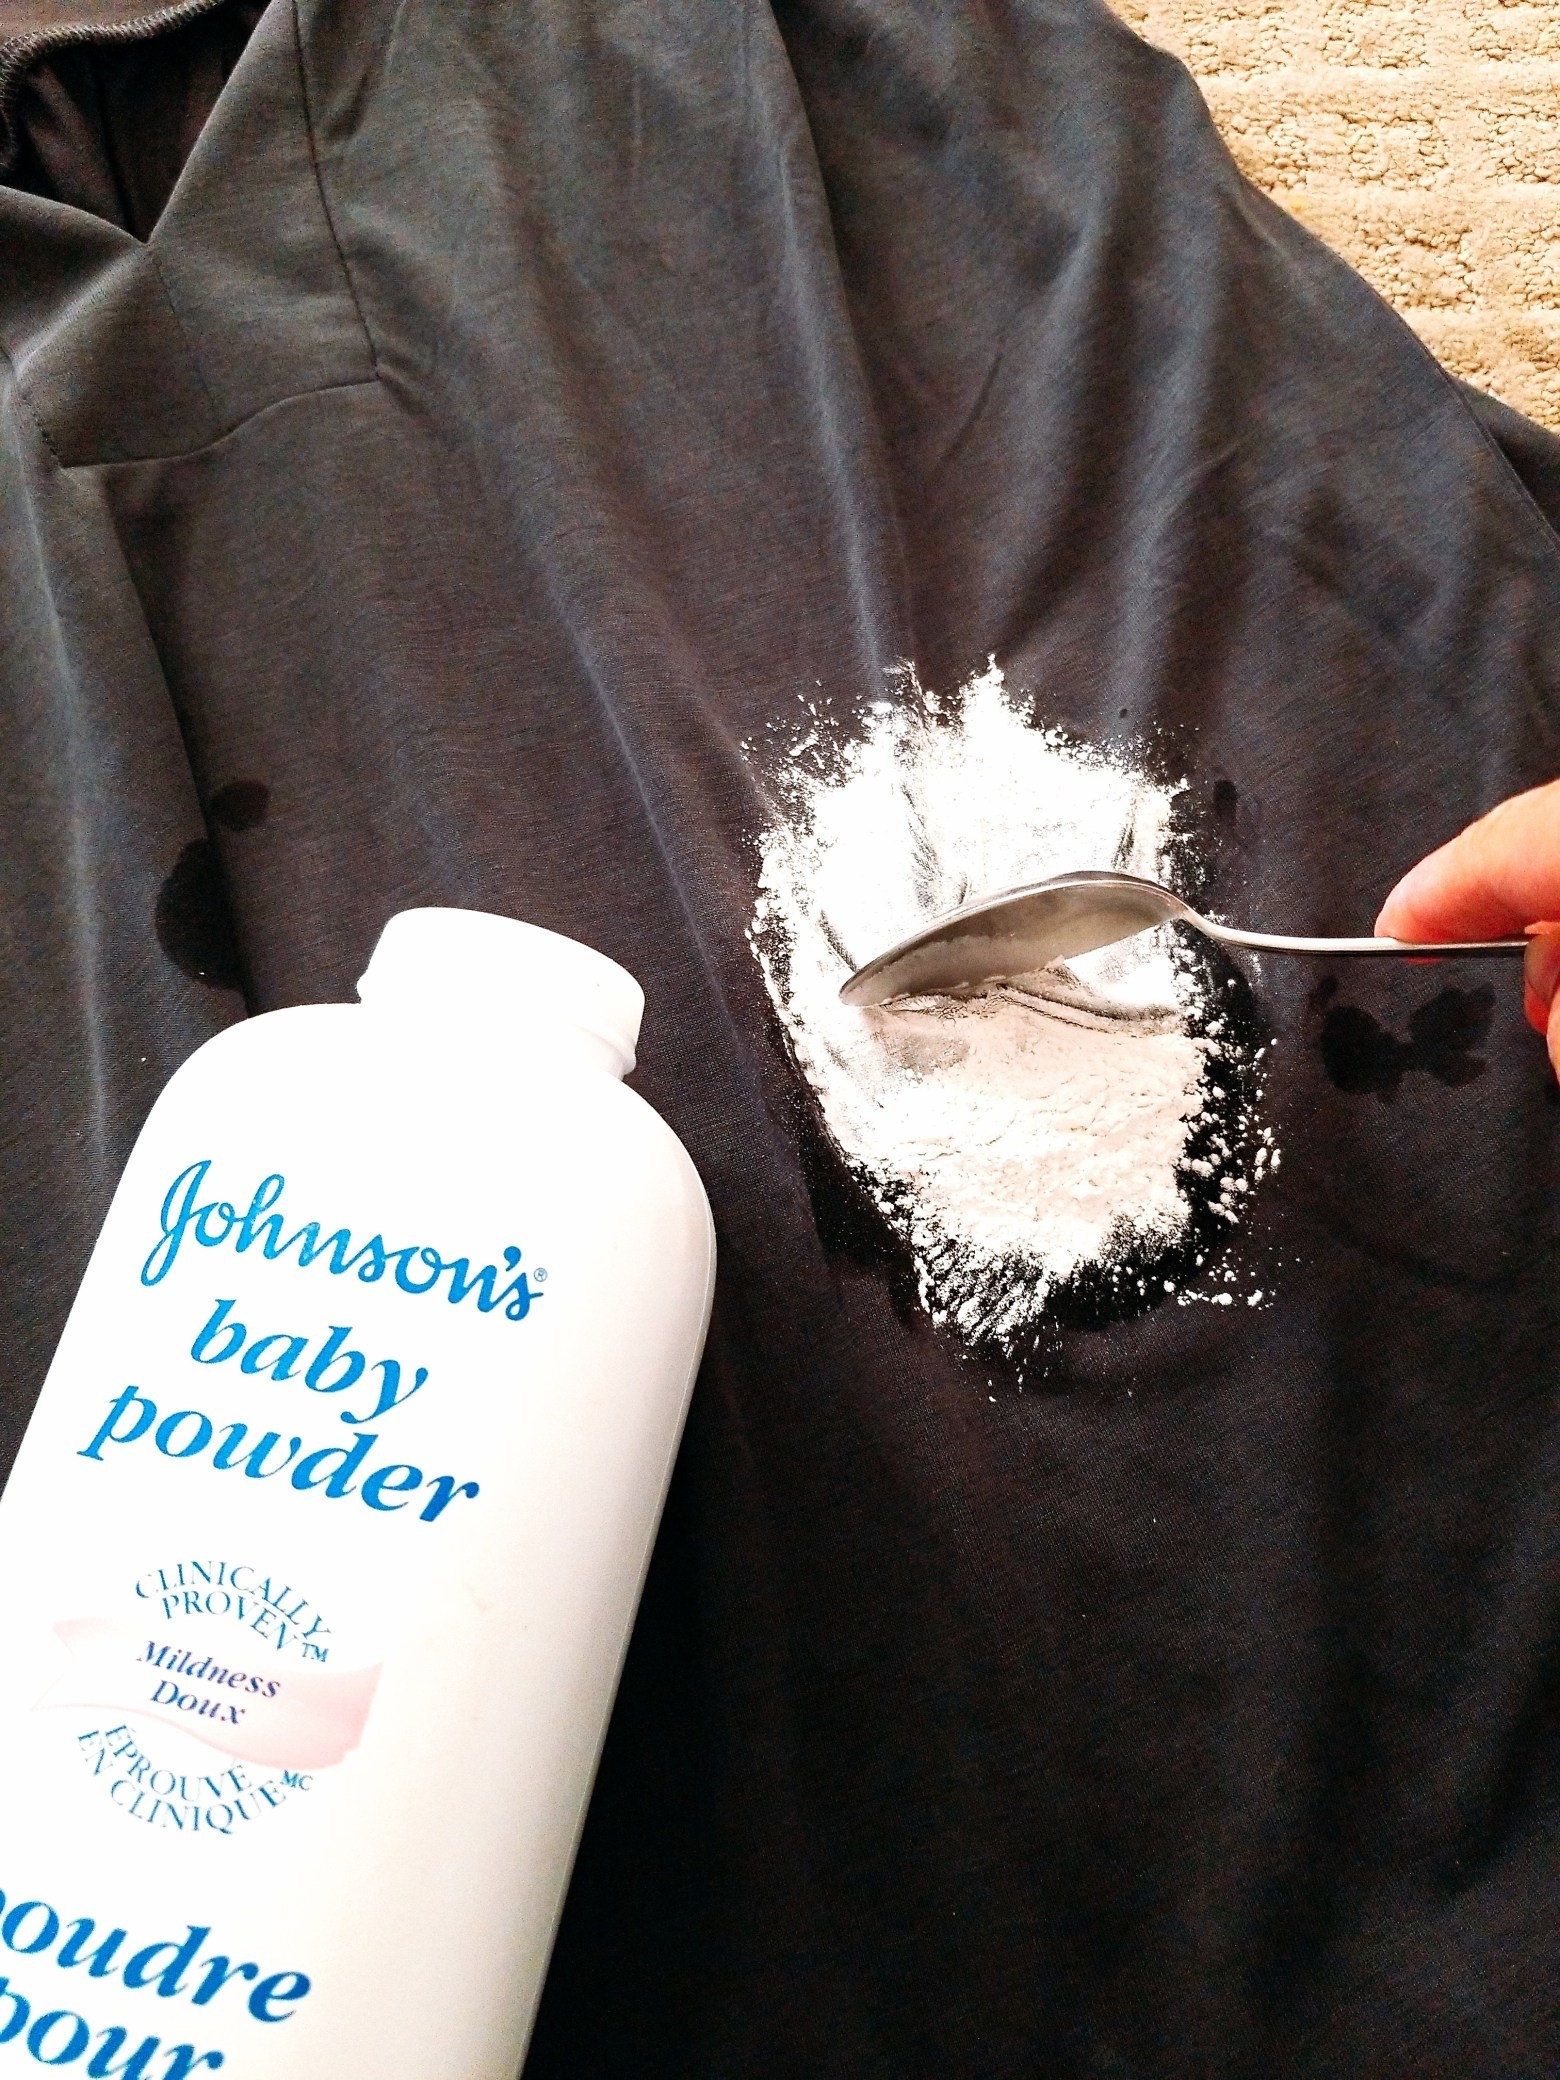 Cleaning a stain with baby powder